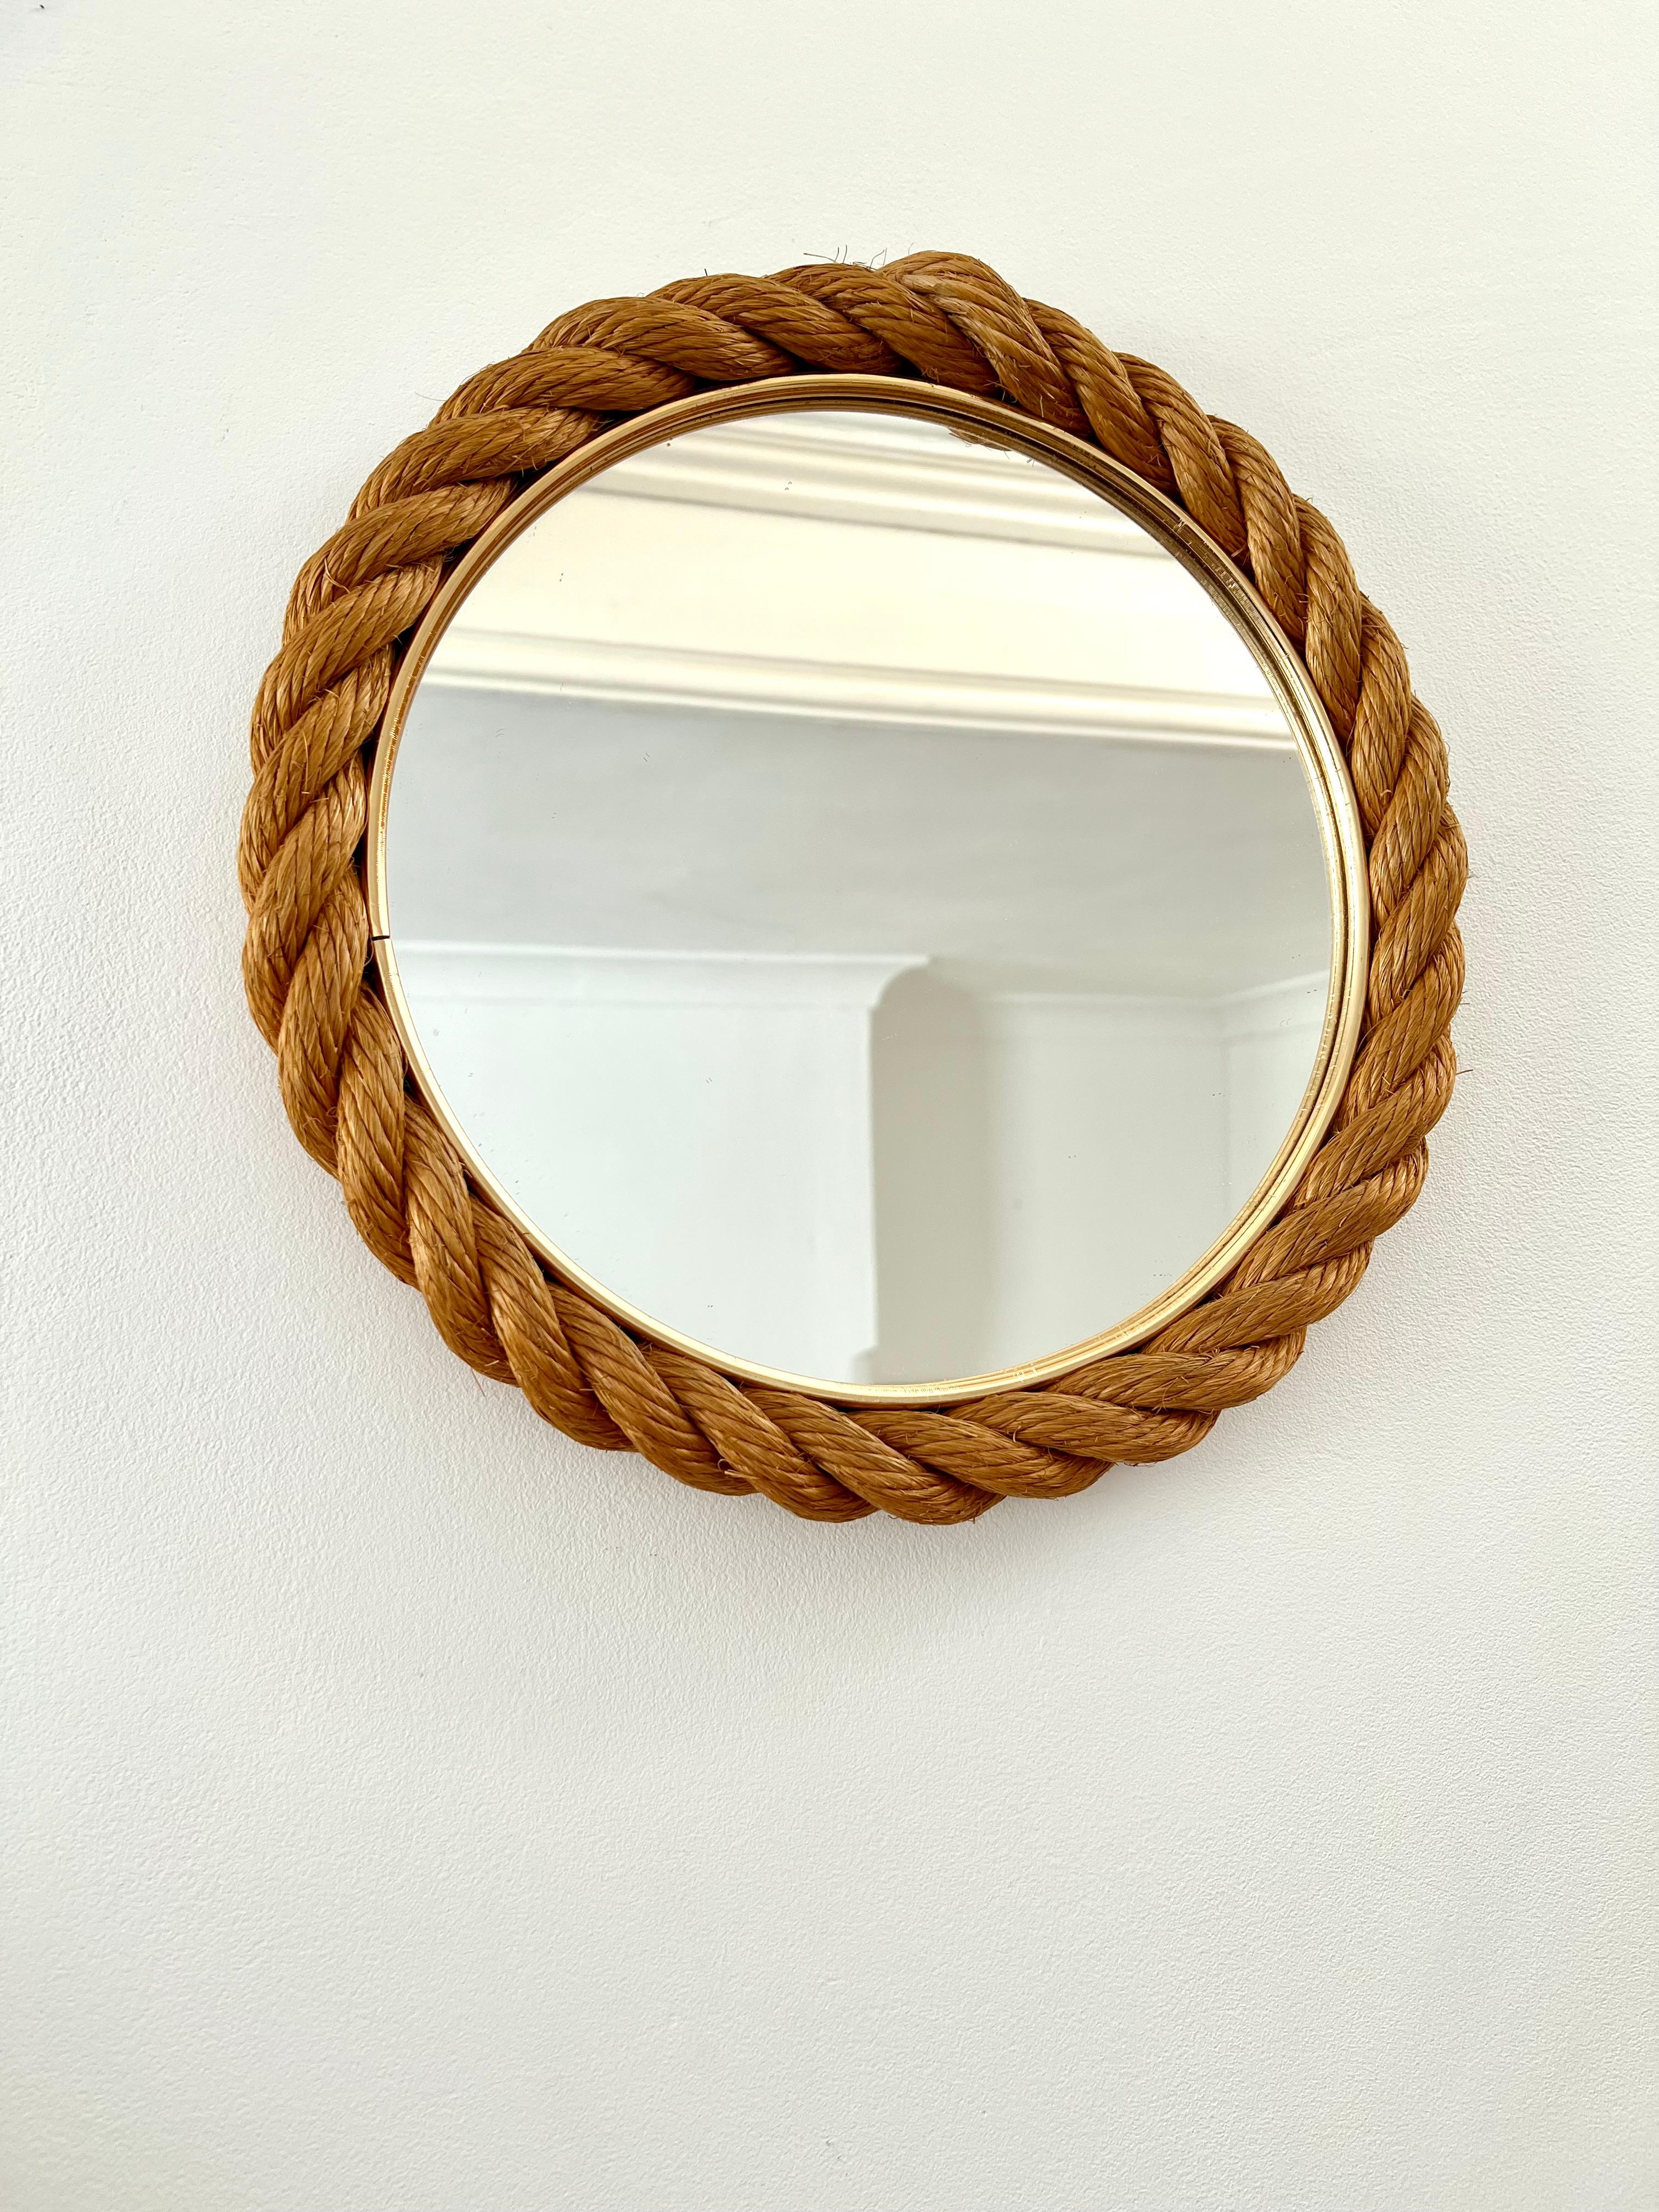 Mirror by Adrien Audoux and Frida Minet, France, circa 1950-1960.

Rope frame with brass banding.

Very good original condition, nice colour to the rope, very clean with no damage to the frame or glass.

33cm diameter.

Clean, ready for use.

Free